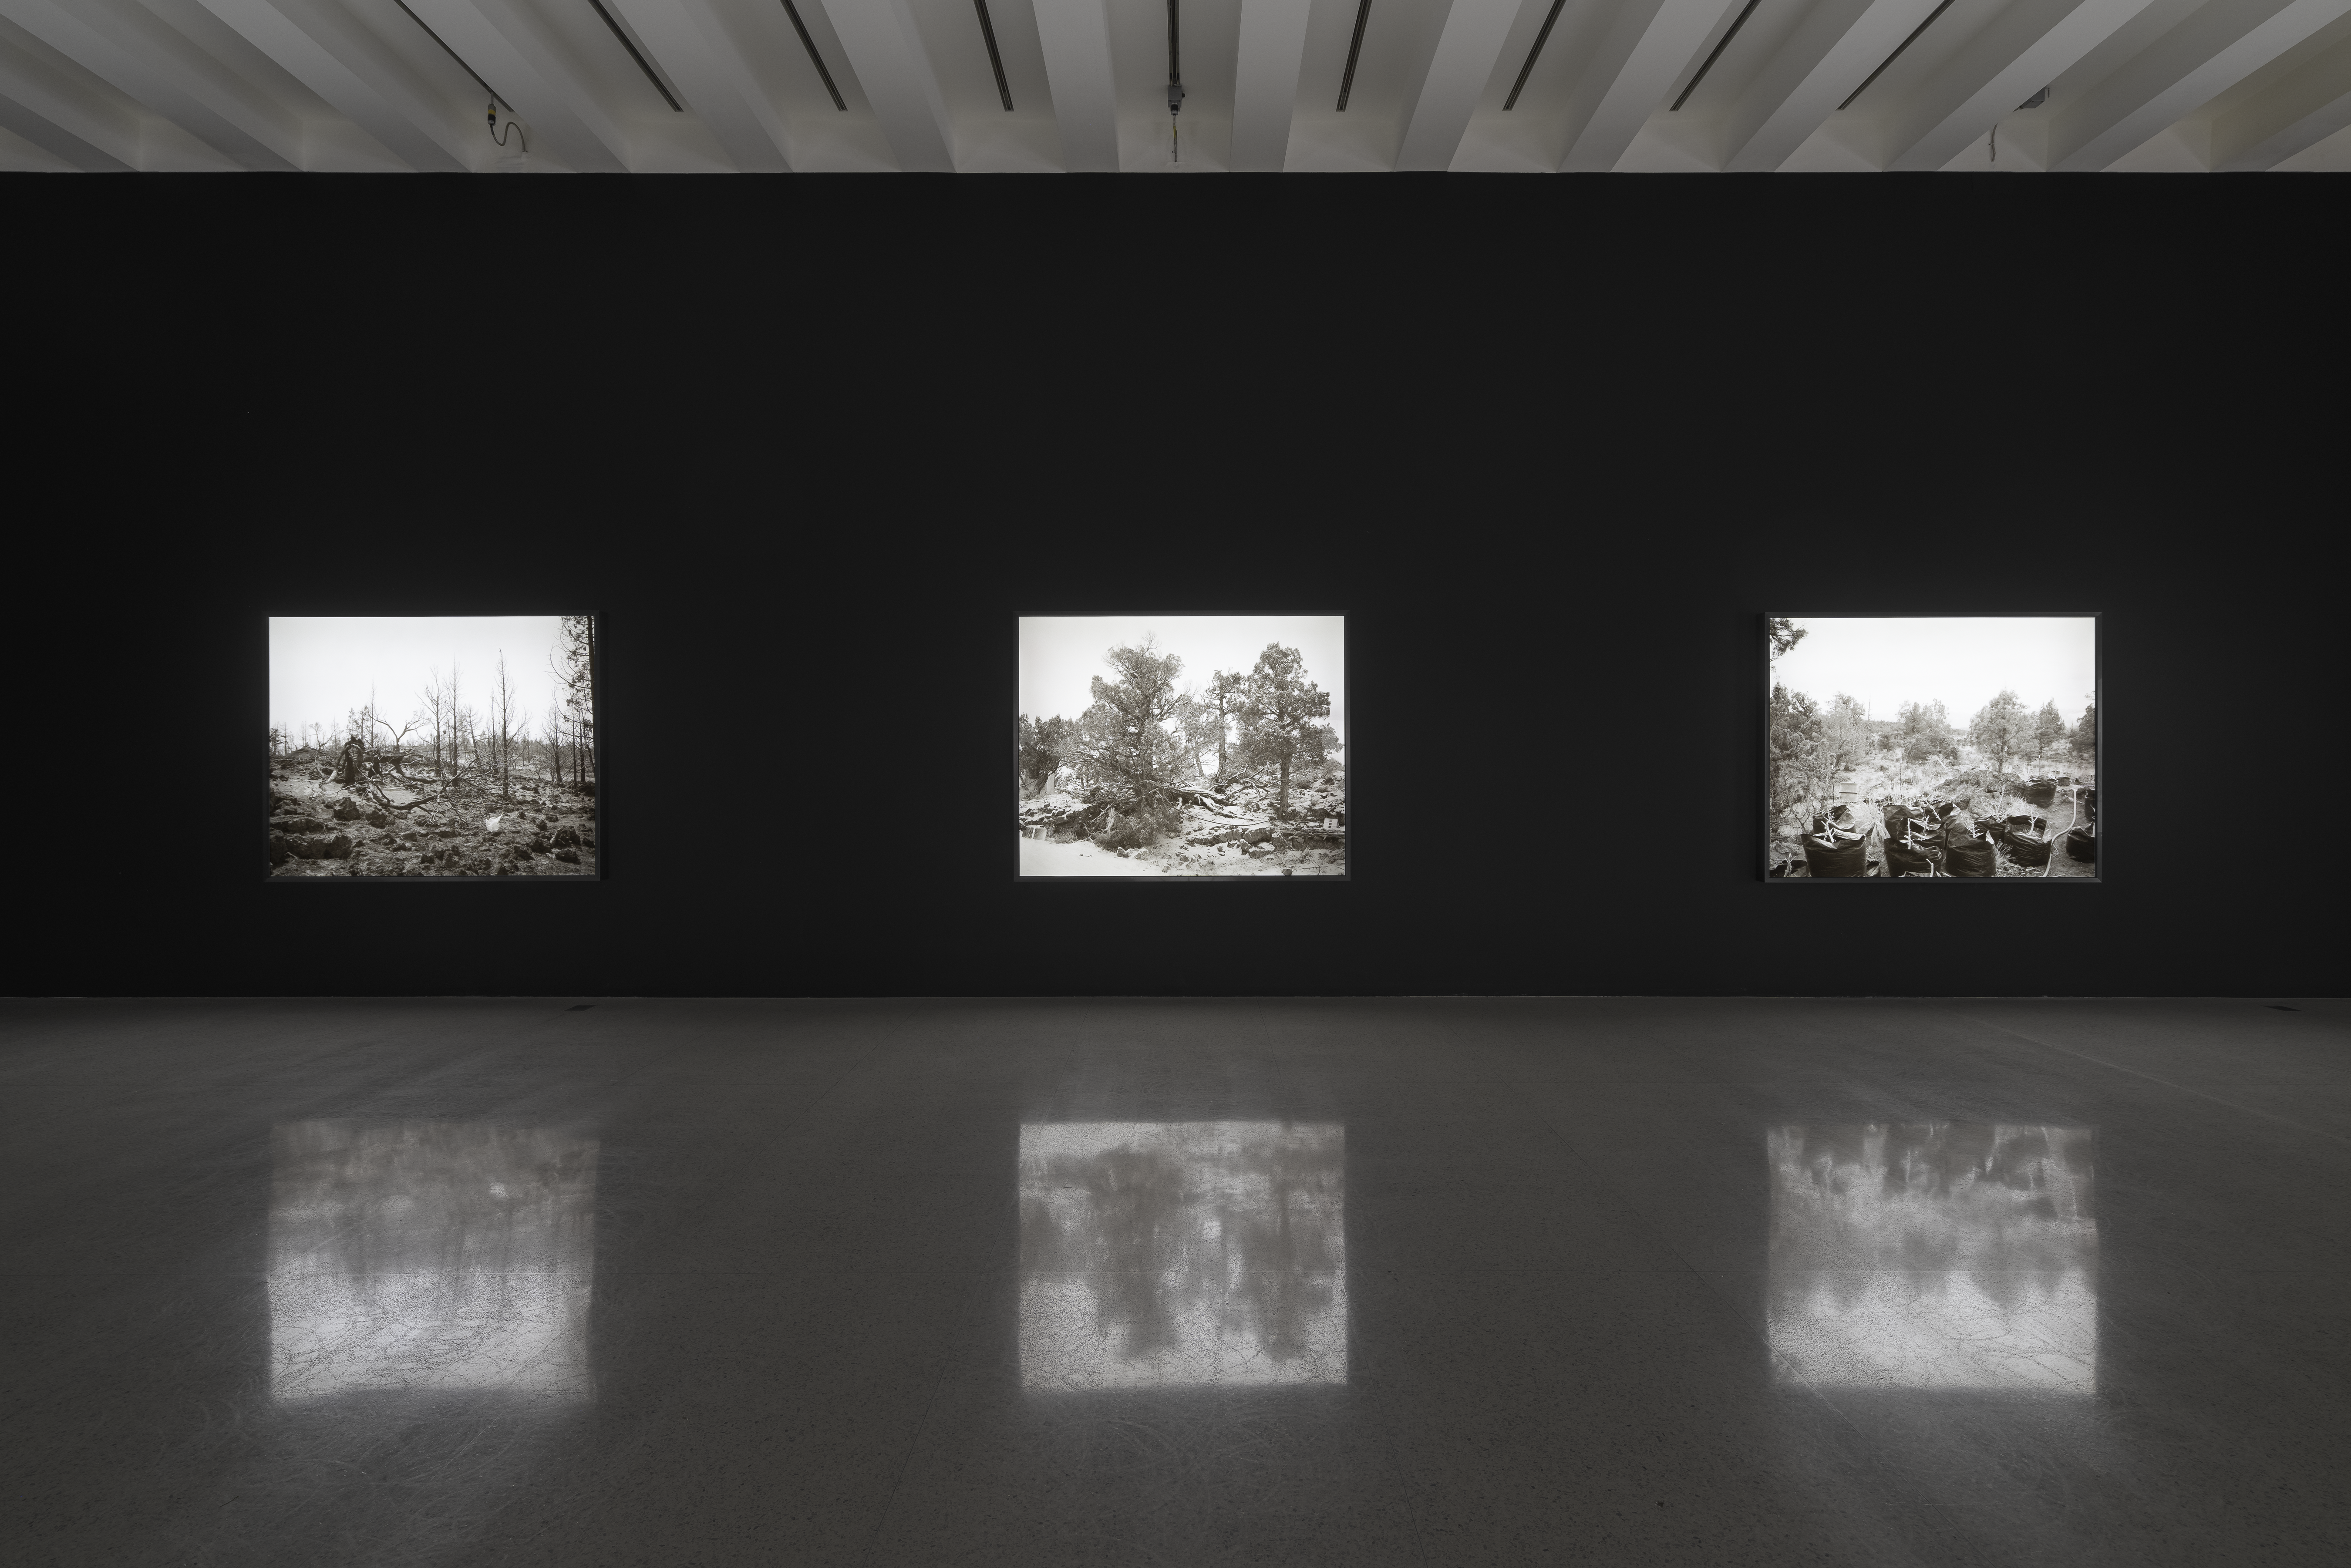 Image: View of the exhibition Pao Houa Her: Paj qaum ntuj / Flowers of the Sky, 2022. Three large landscape photographs of Mount Shasta agriculture hang on a black wall directly ahead. Each image is in grayscale and lit from behind. Blurry inverses of the photographs are reflected on the marble floor of the gallery. Photo by Eric Mueller for Walker Art Center. Image courtesy Walker Art Center, Minneapolis.